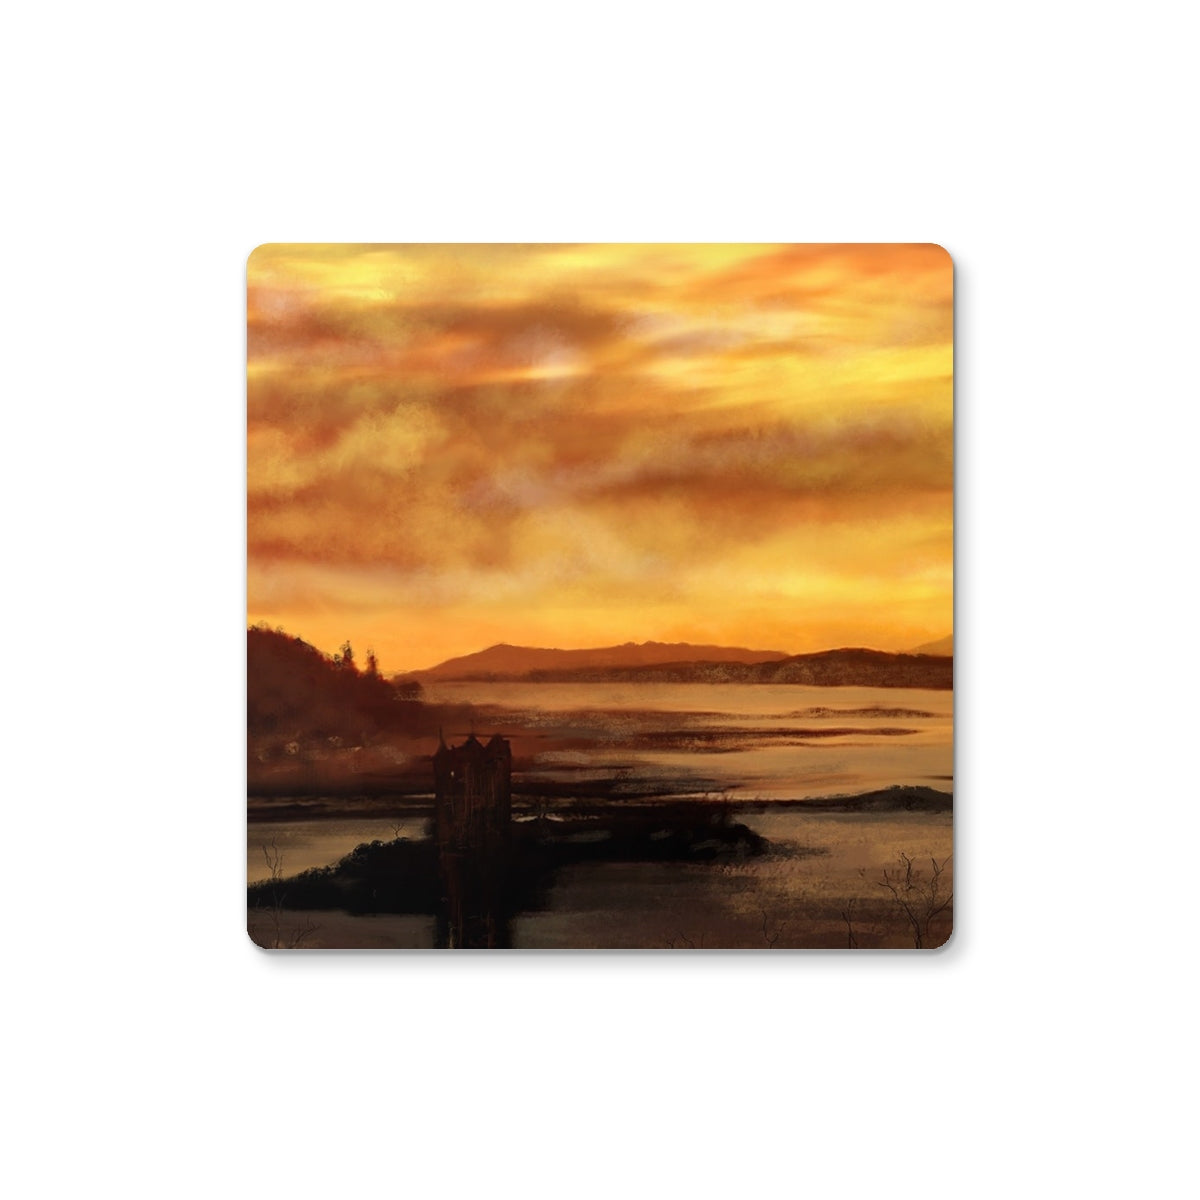 Castle Stalker Dusk Art Gifts Coaster-Coasters-Historic & Iconic Scotland Art Gallery-2 Coasters-Paintings, Prints, Homeware, Art Gifts From Scotland By Scottish Artist Kevin Hunter